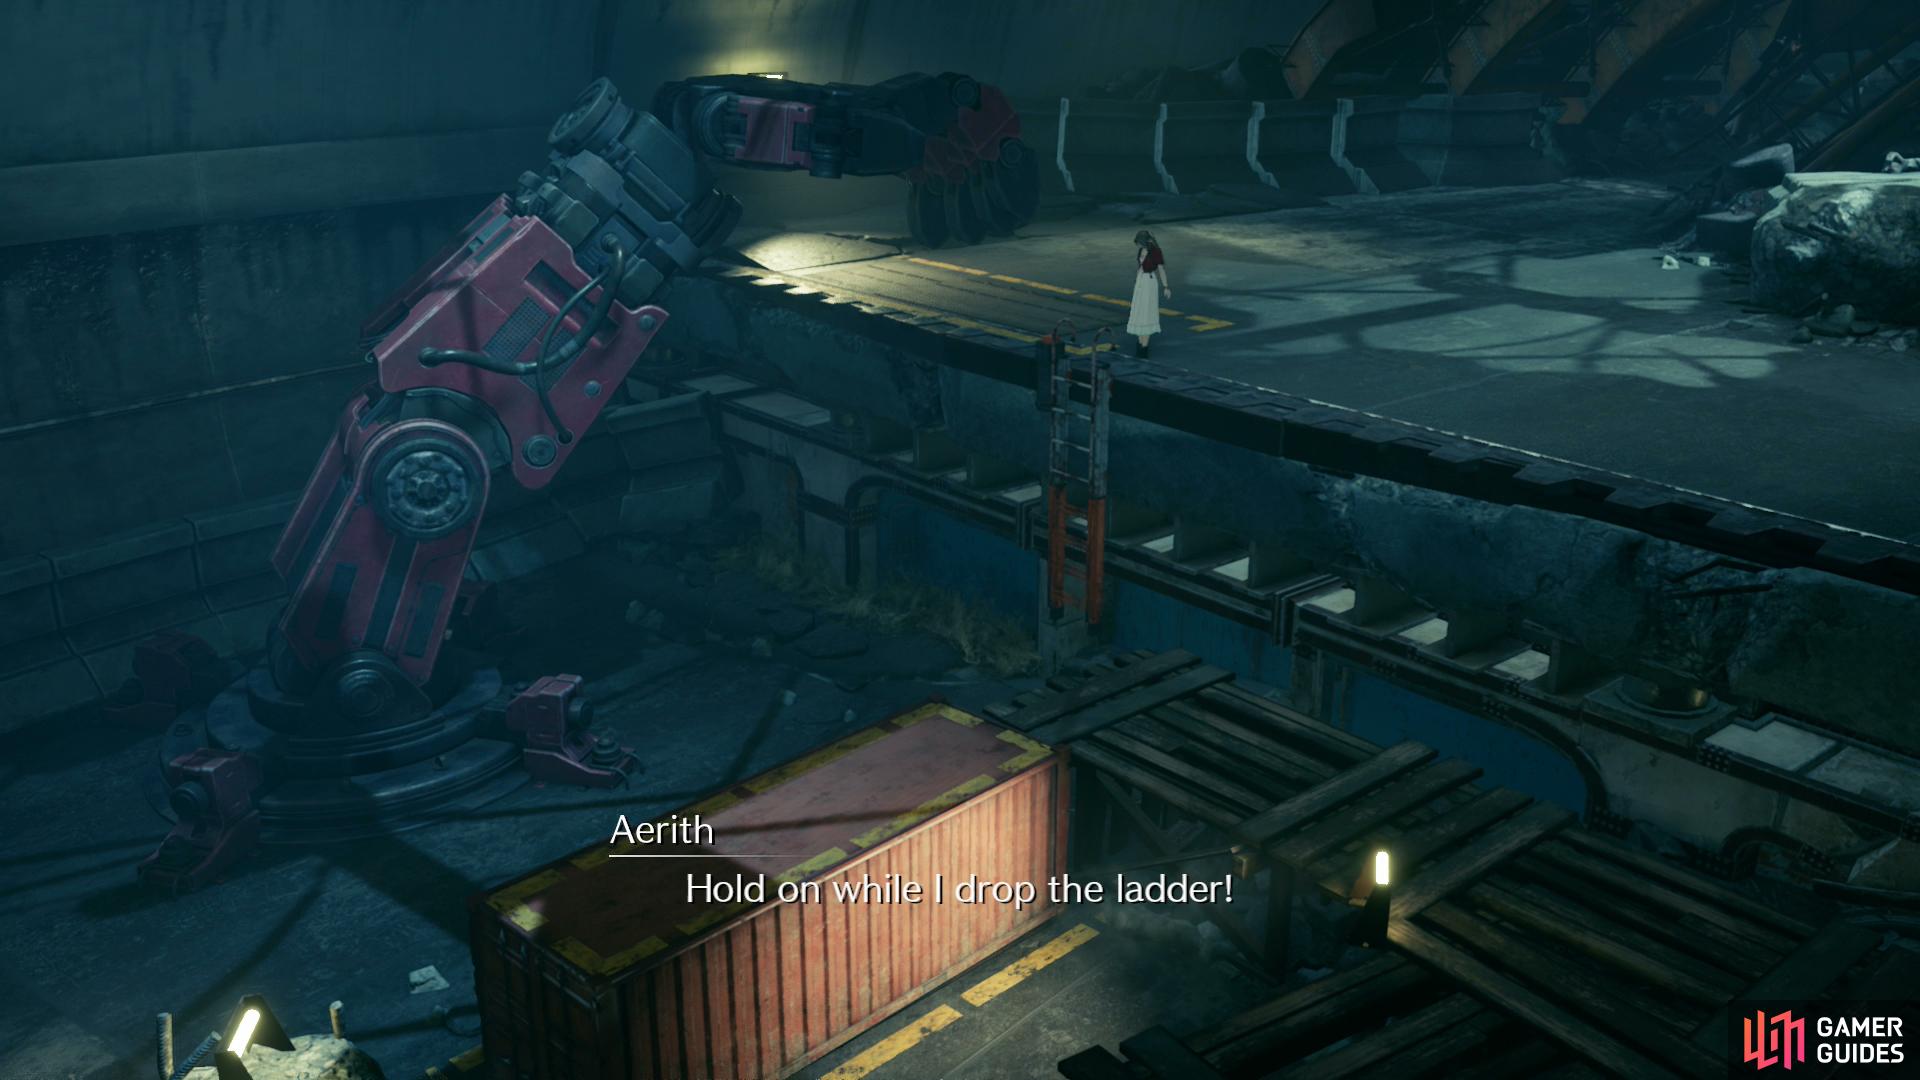 Raise Aerith to the opposite ledge and she'll lower a ladder.